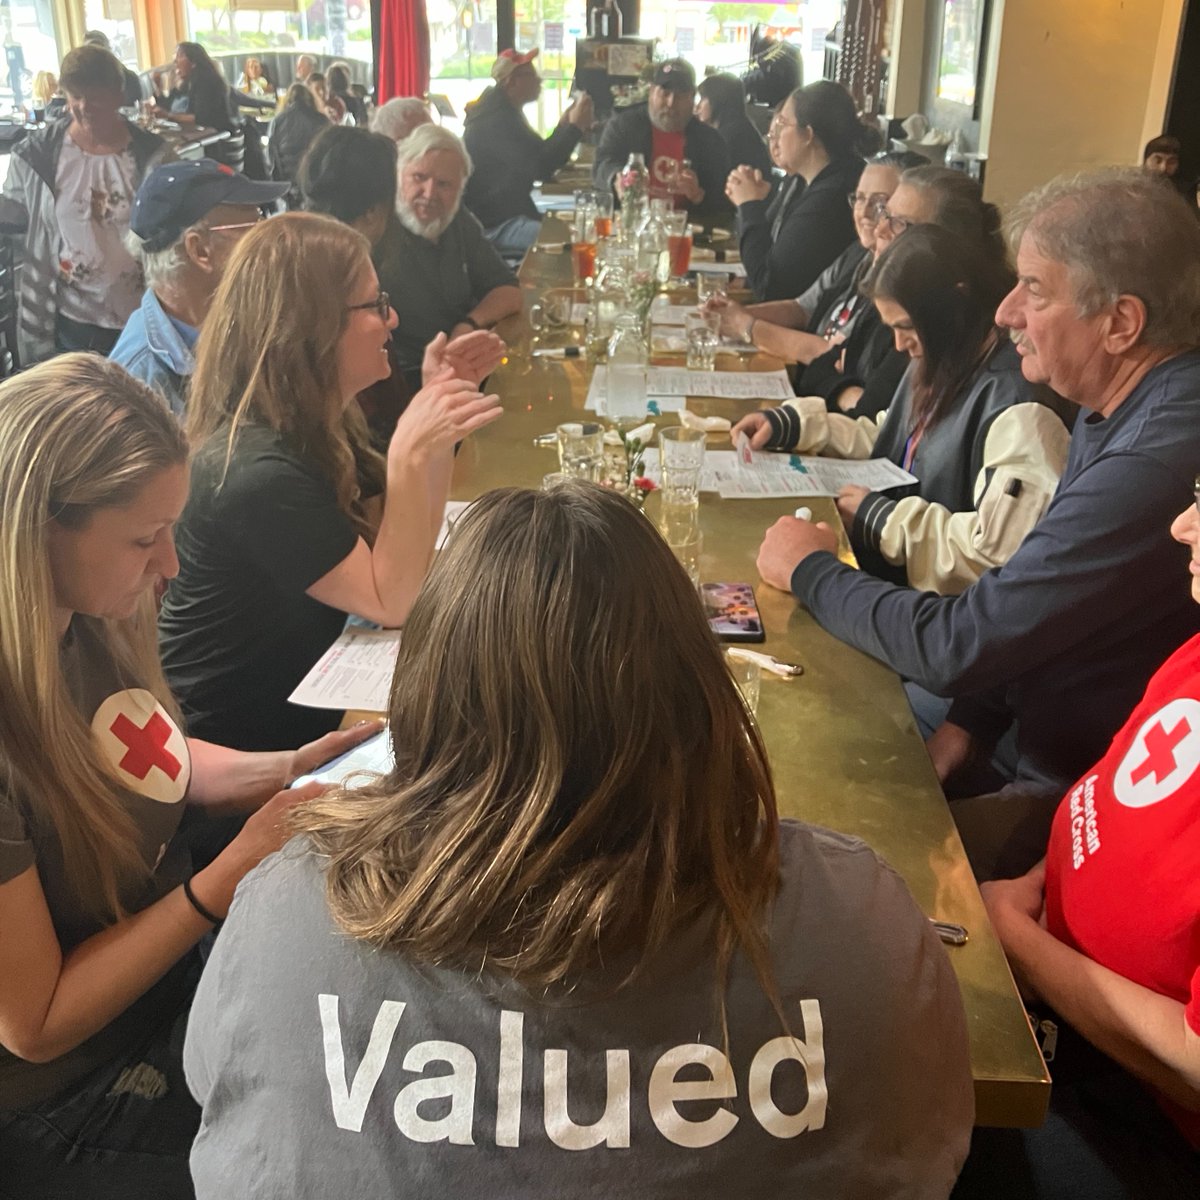 VALUED is right! Here's a snapshot of our volunteer appreciation event for those who help carry out the Red Cross misison in Lake, Mendocino and Colusa counties! THANK YOU!